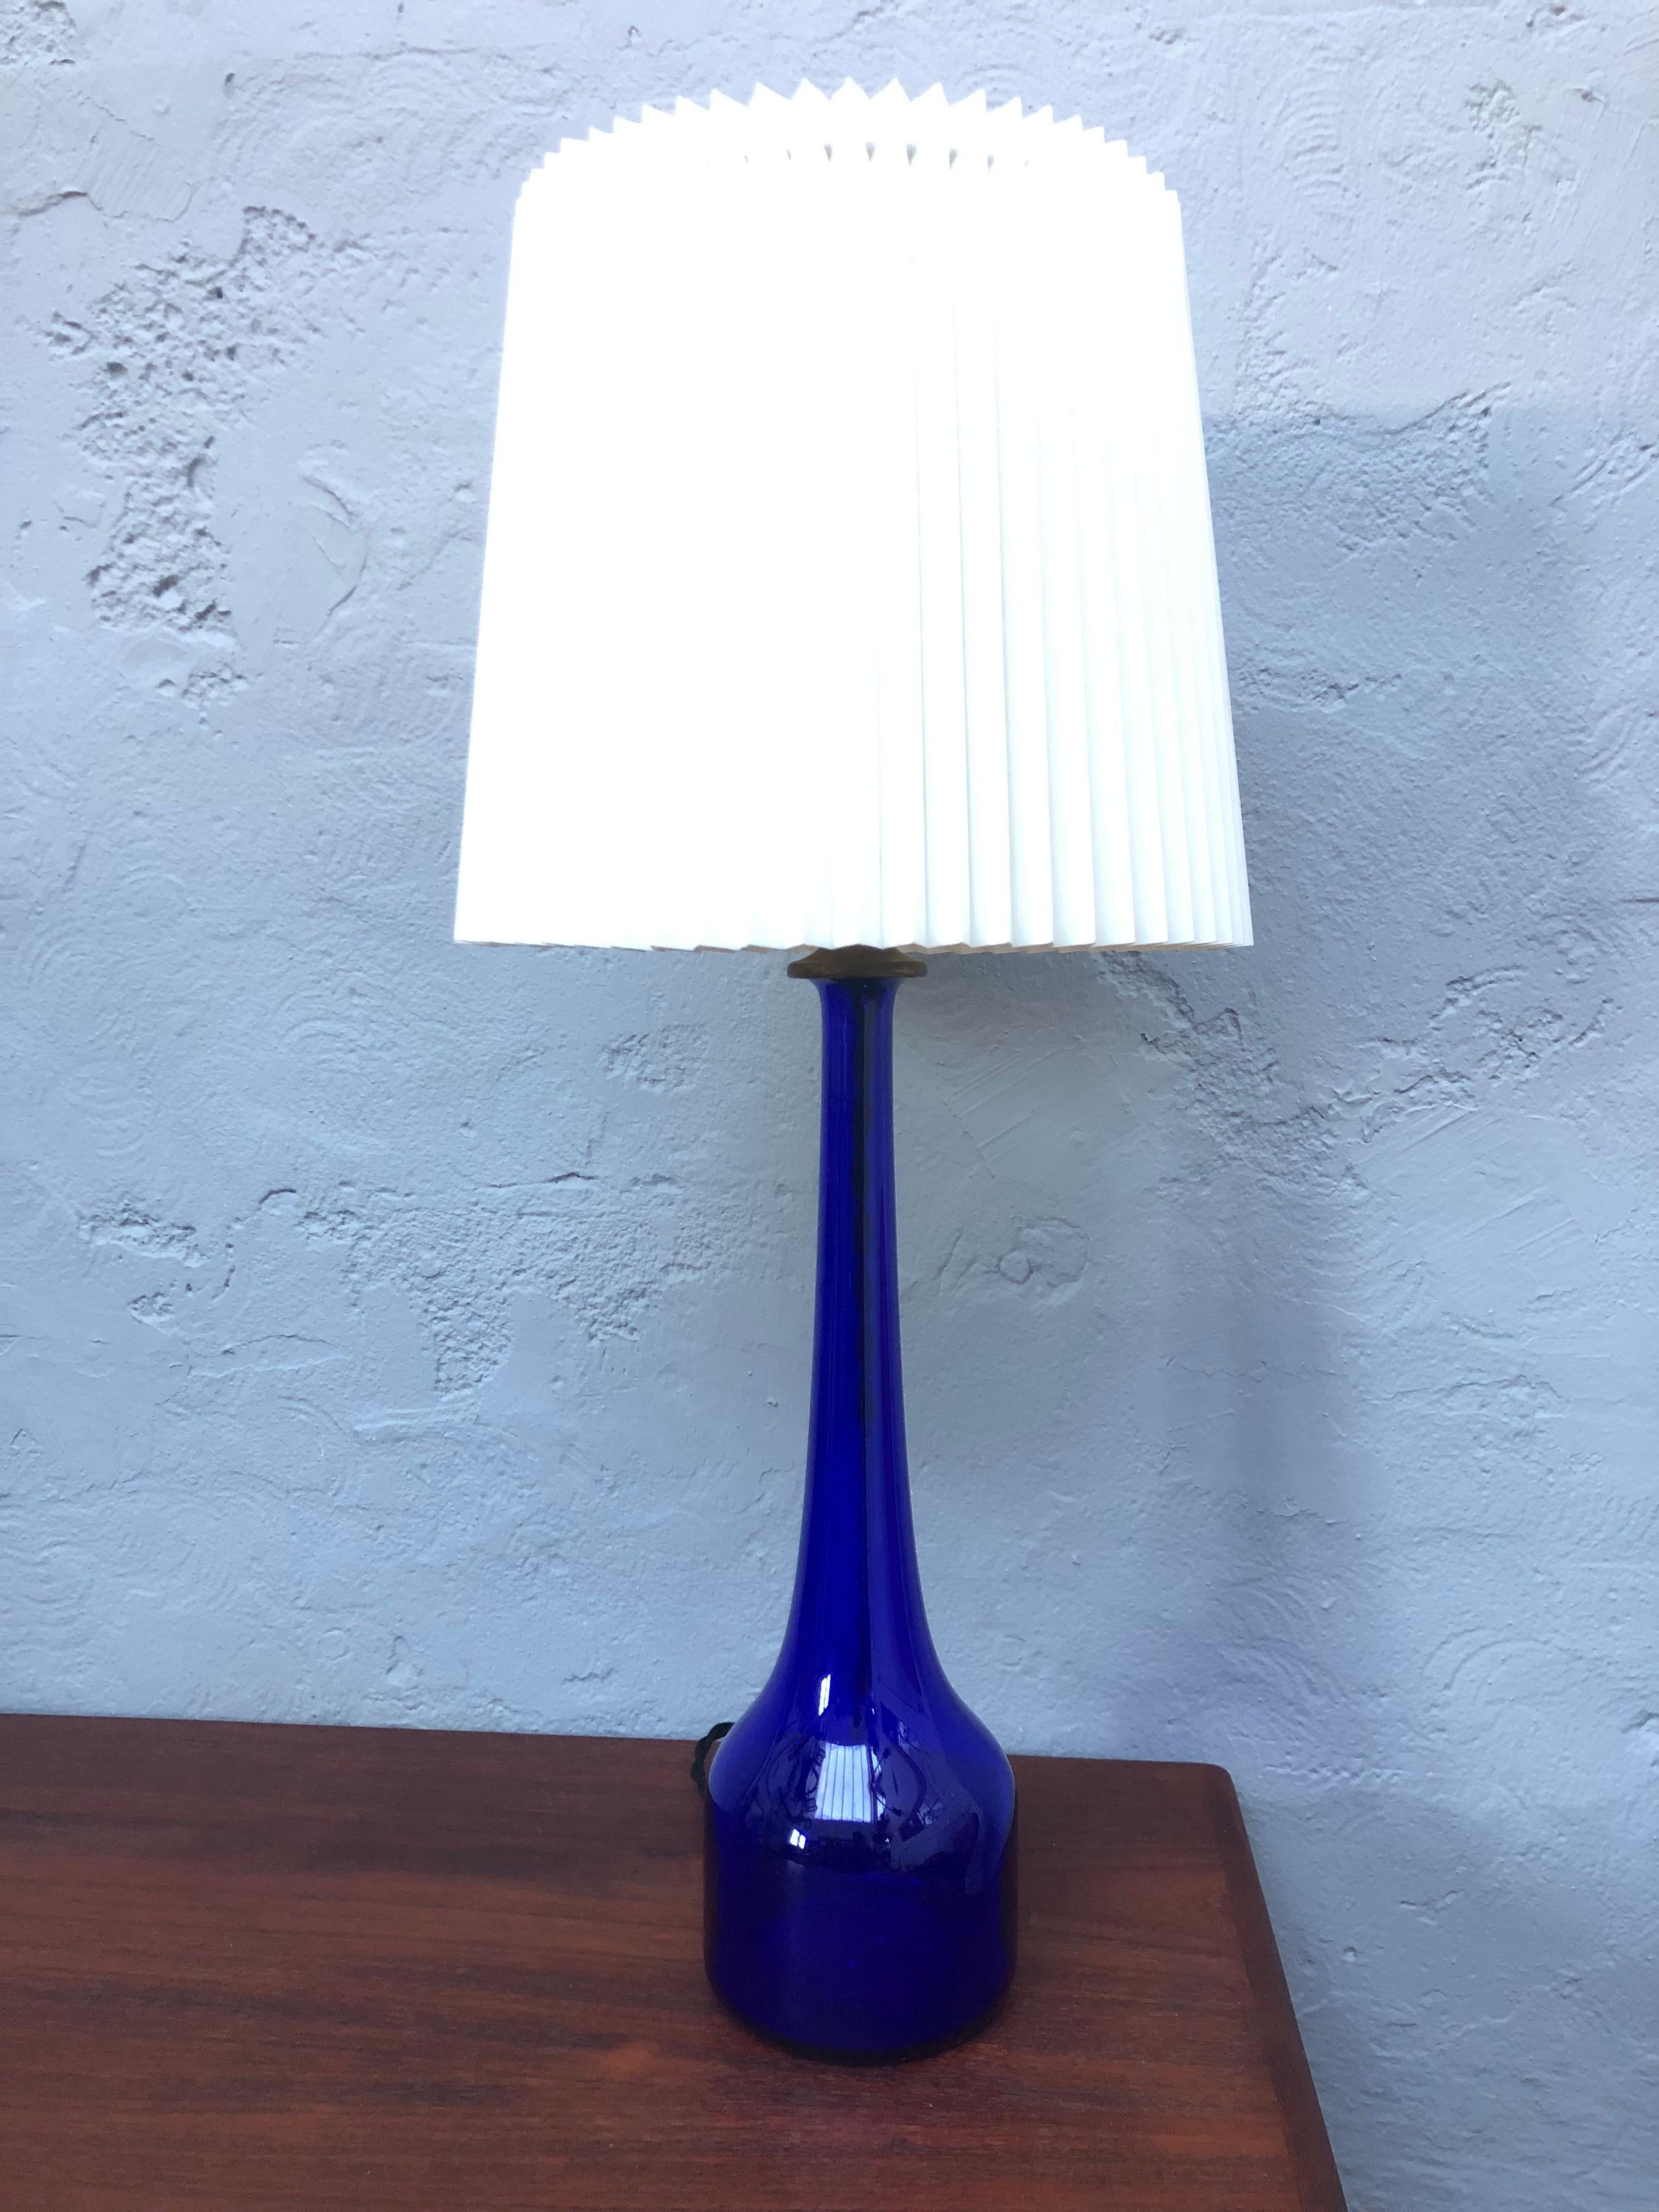 Vintage Danish table lamp by Kastrup glass for Holmegaard in blue hand blown glass from the 1960s.
Rewired with twisted black cloth flex and can be delivered with an EU UK or US plug.

The work was laid on 12 October 1847 by master of the stable